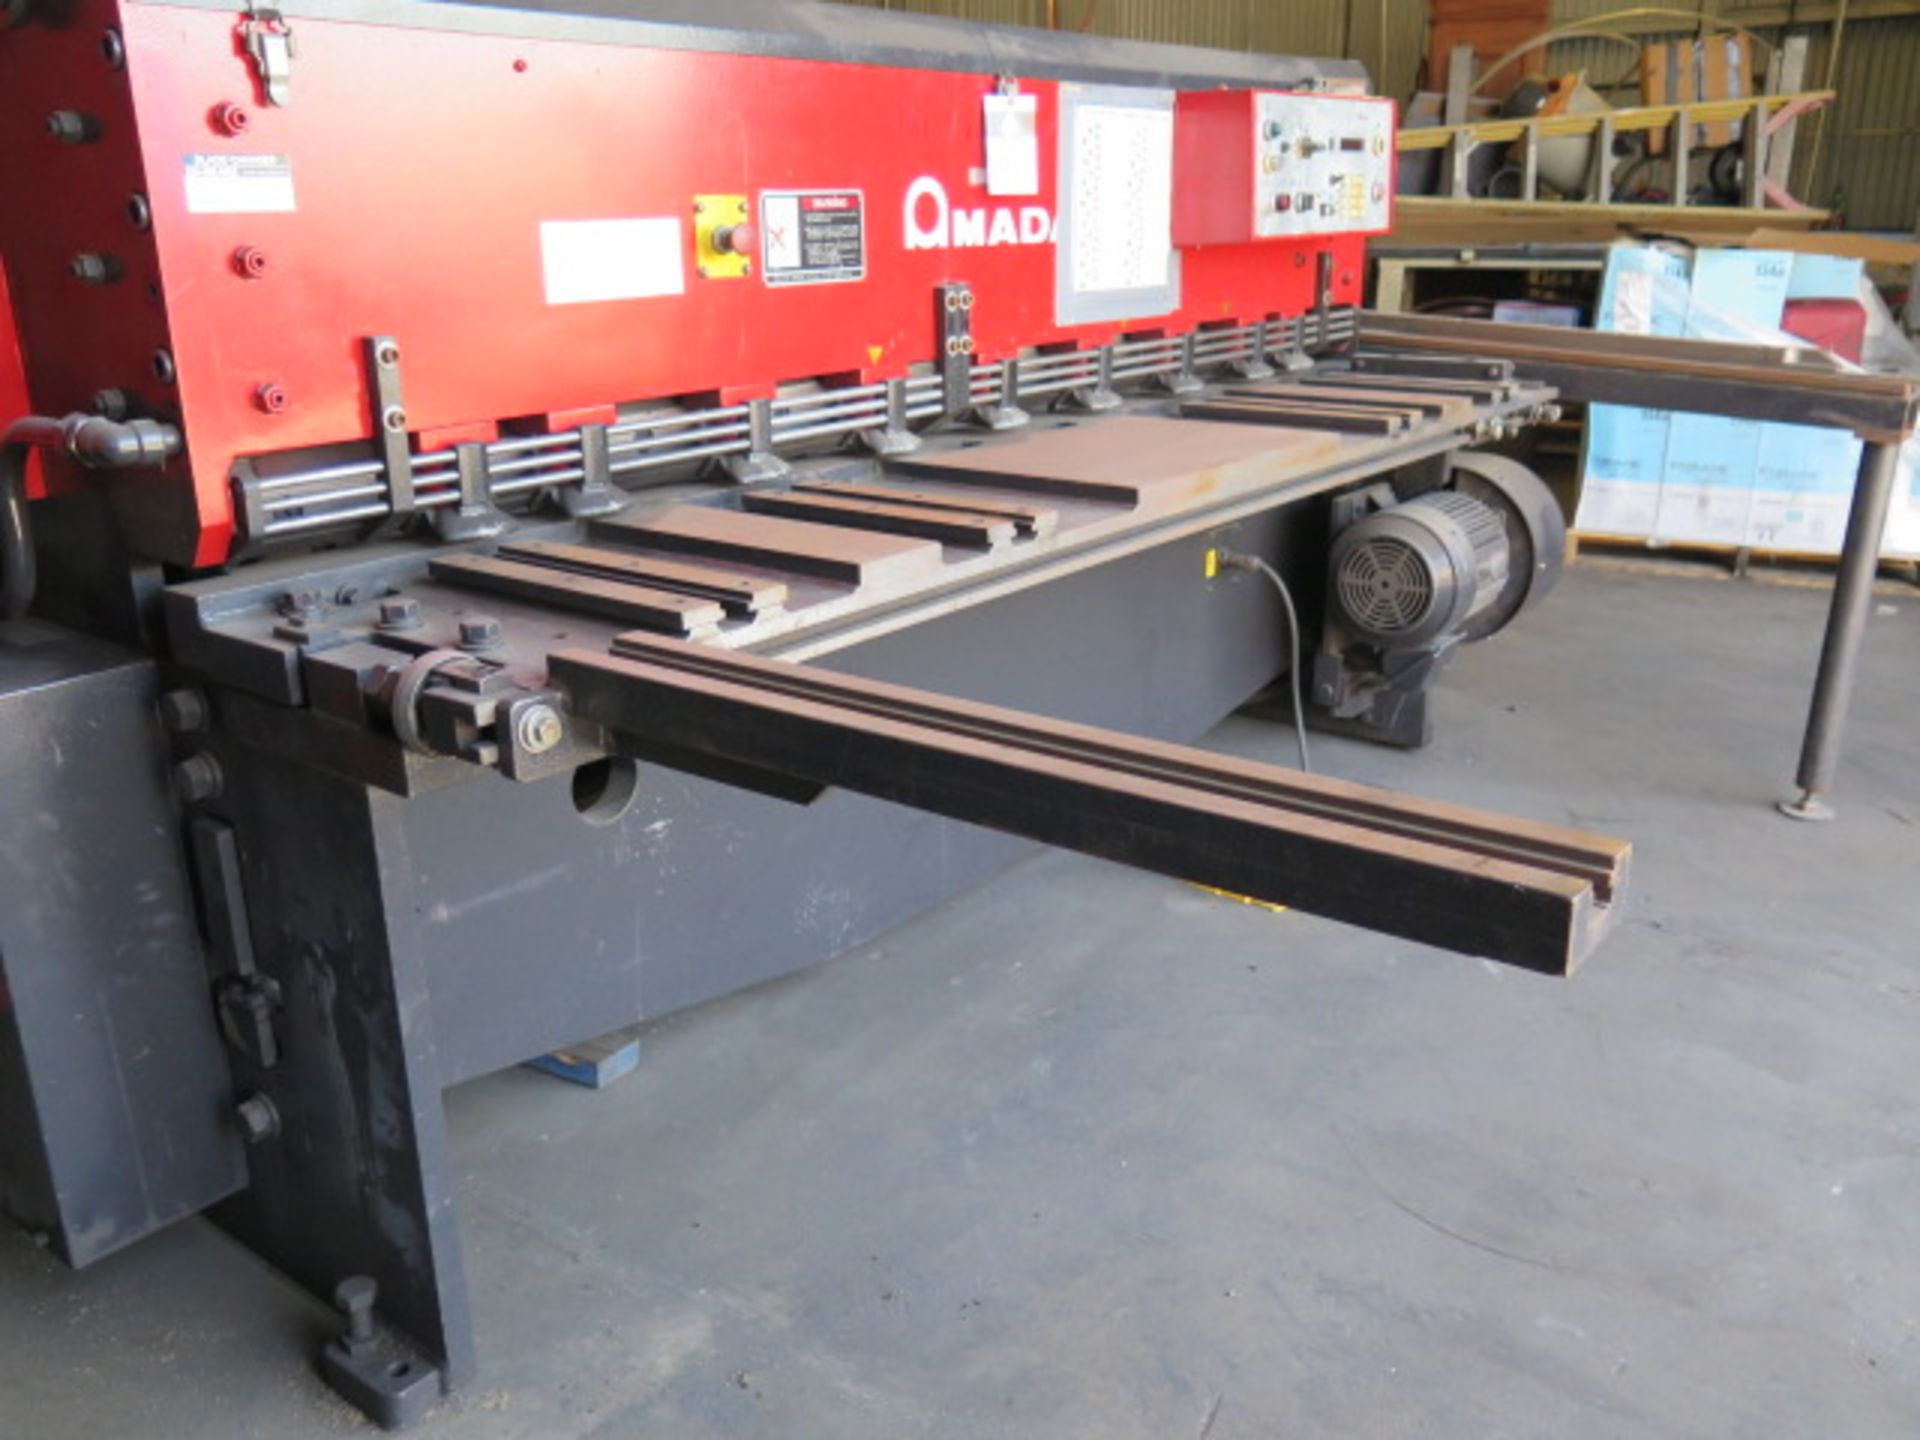 Amada M-2060 ¼” x 78” Power Shear s/n 20600705 w/ Amada Controls and BG, 88” Sq Arm, SOLD AS IS - Image 6 of 12